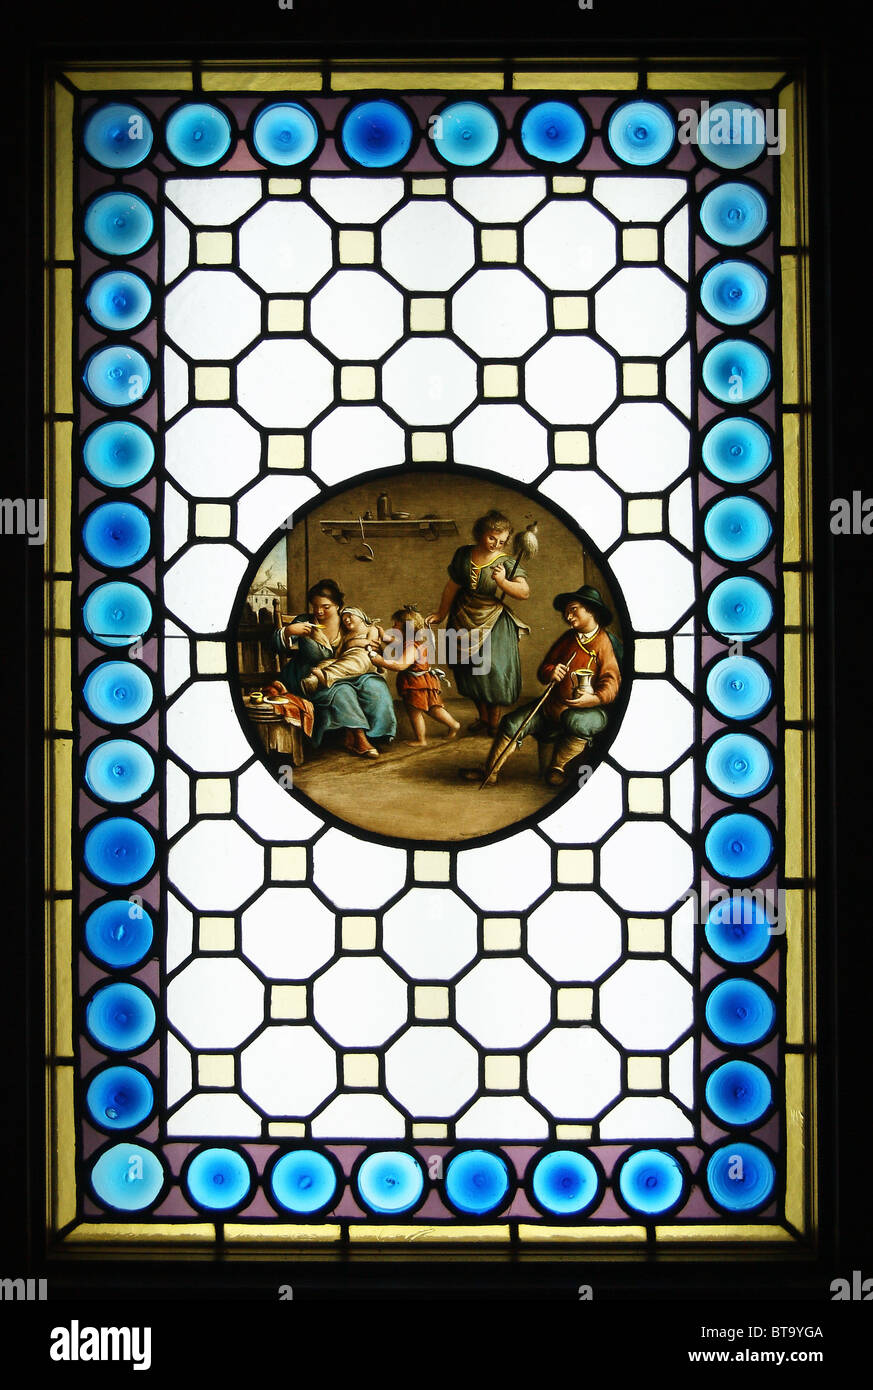 Stained glass window with a painted life scene in tondo (20th century). Museum of Architecture, Wroclaw. Stock Photo